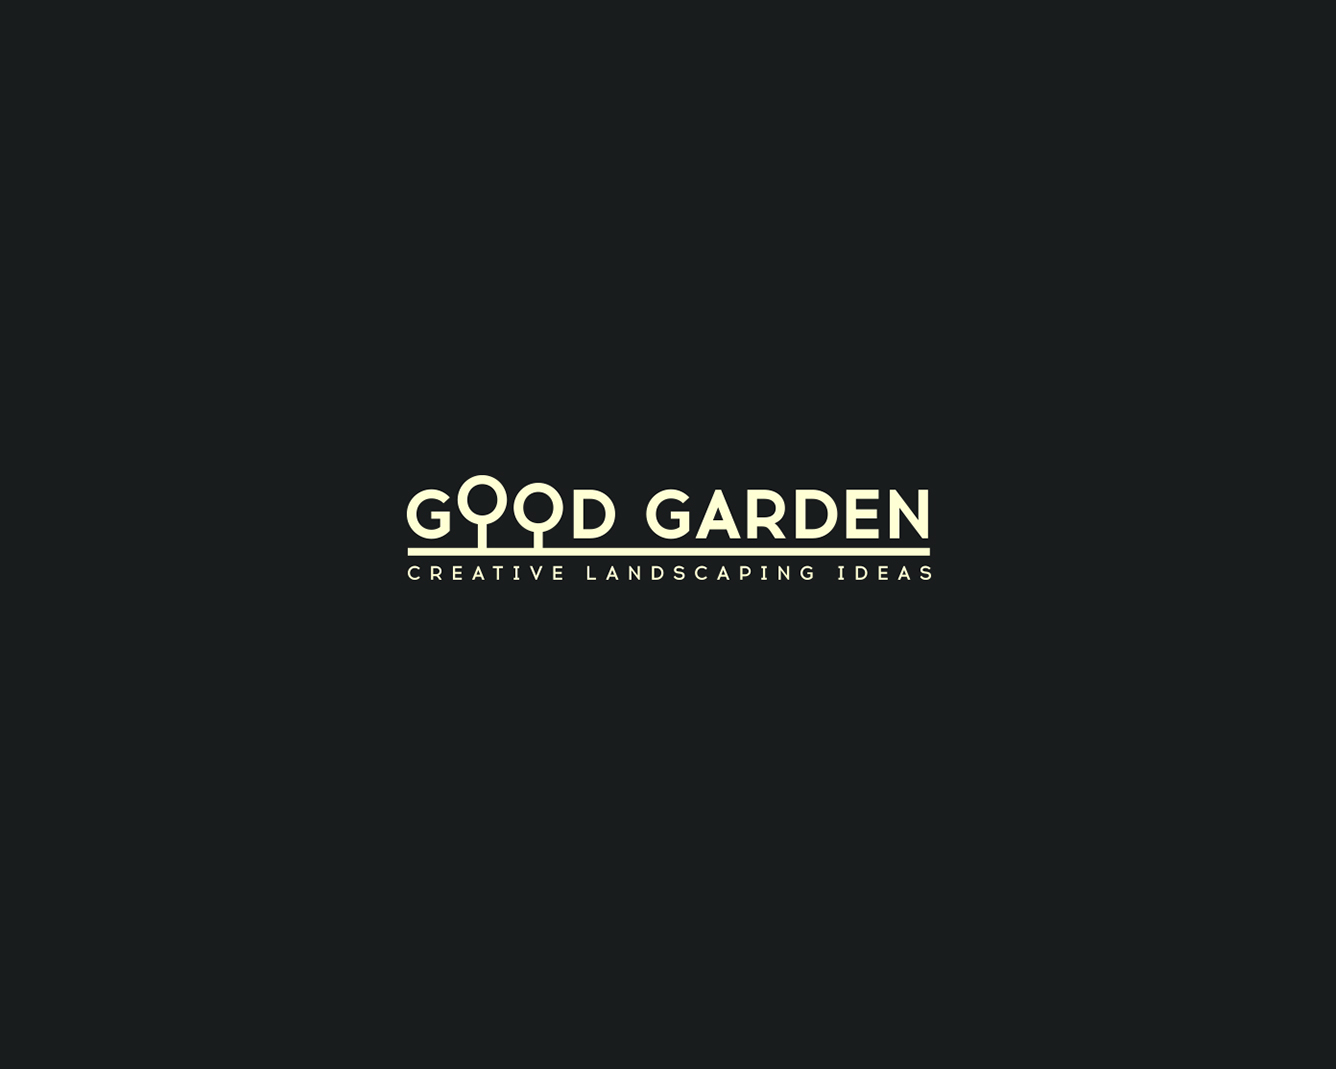 Designer creates logos with hidden meanings - 20